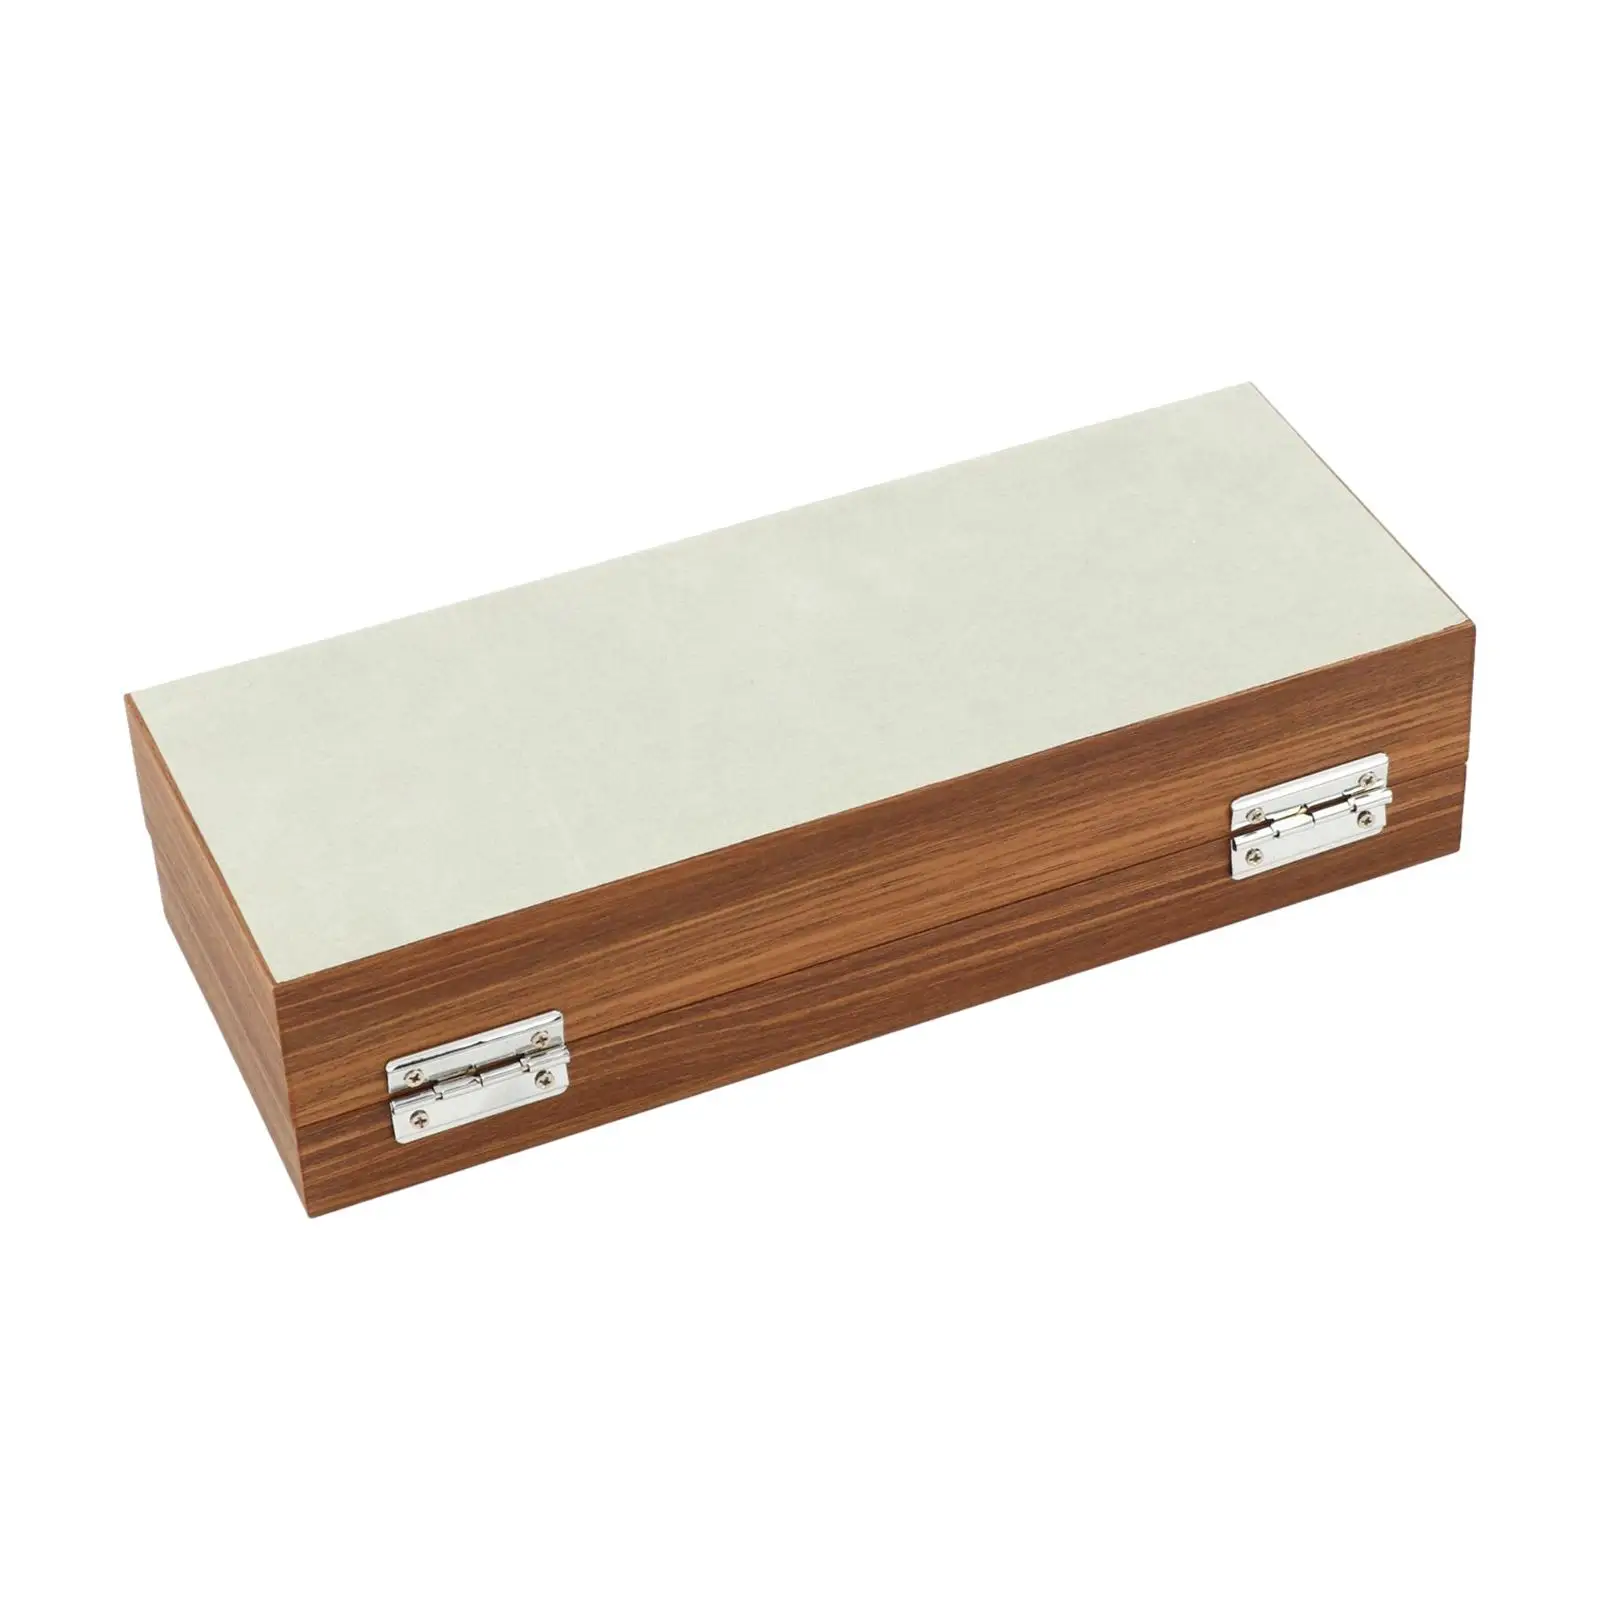 Watch Storage Box 6 Wide Slots Wood Watch Box for Men Women Home Decoration Watches Jewelry Display Table Dresser Shop Display